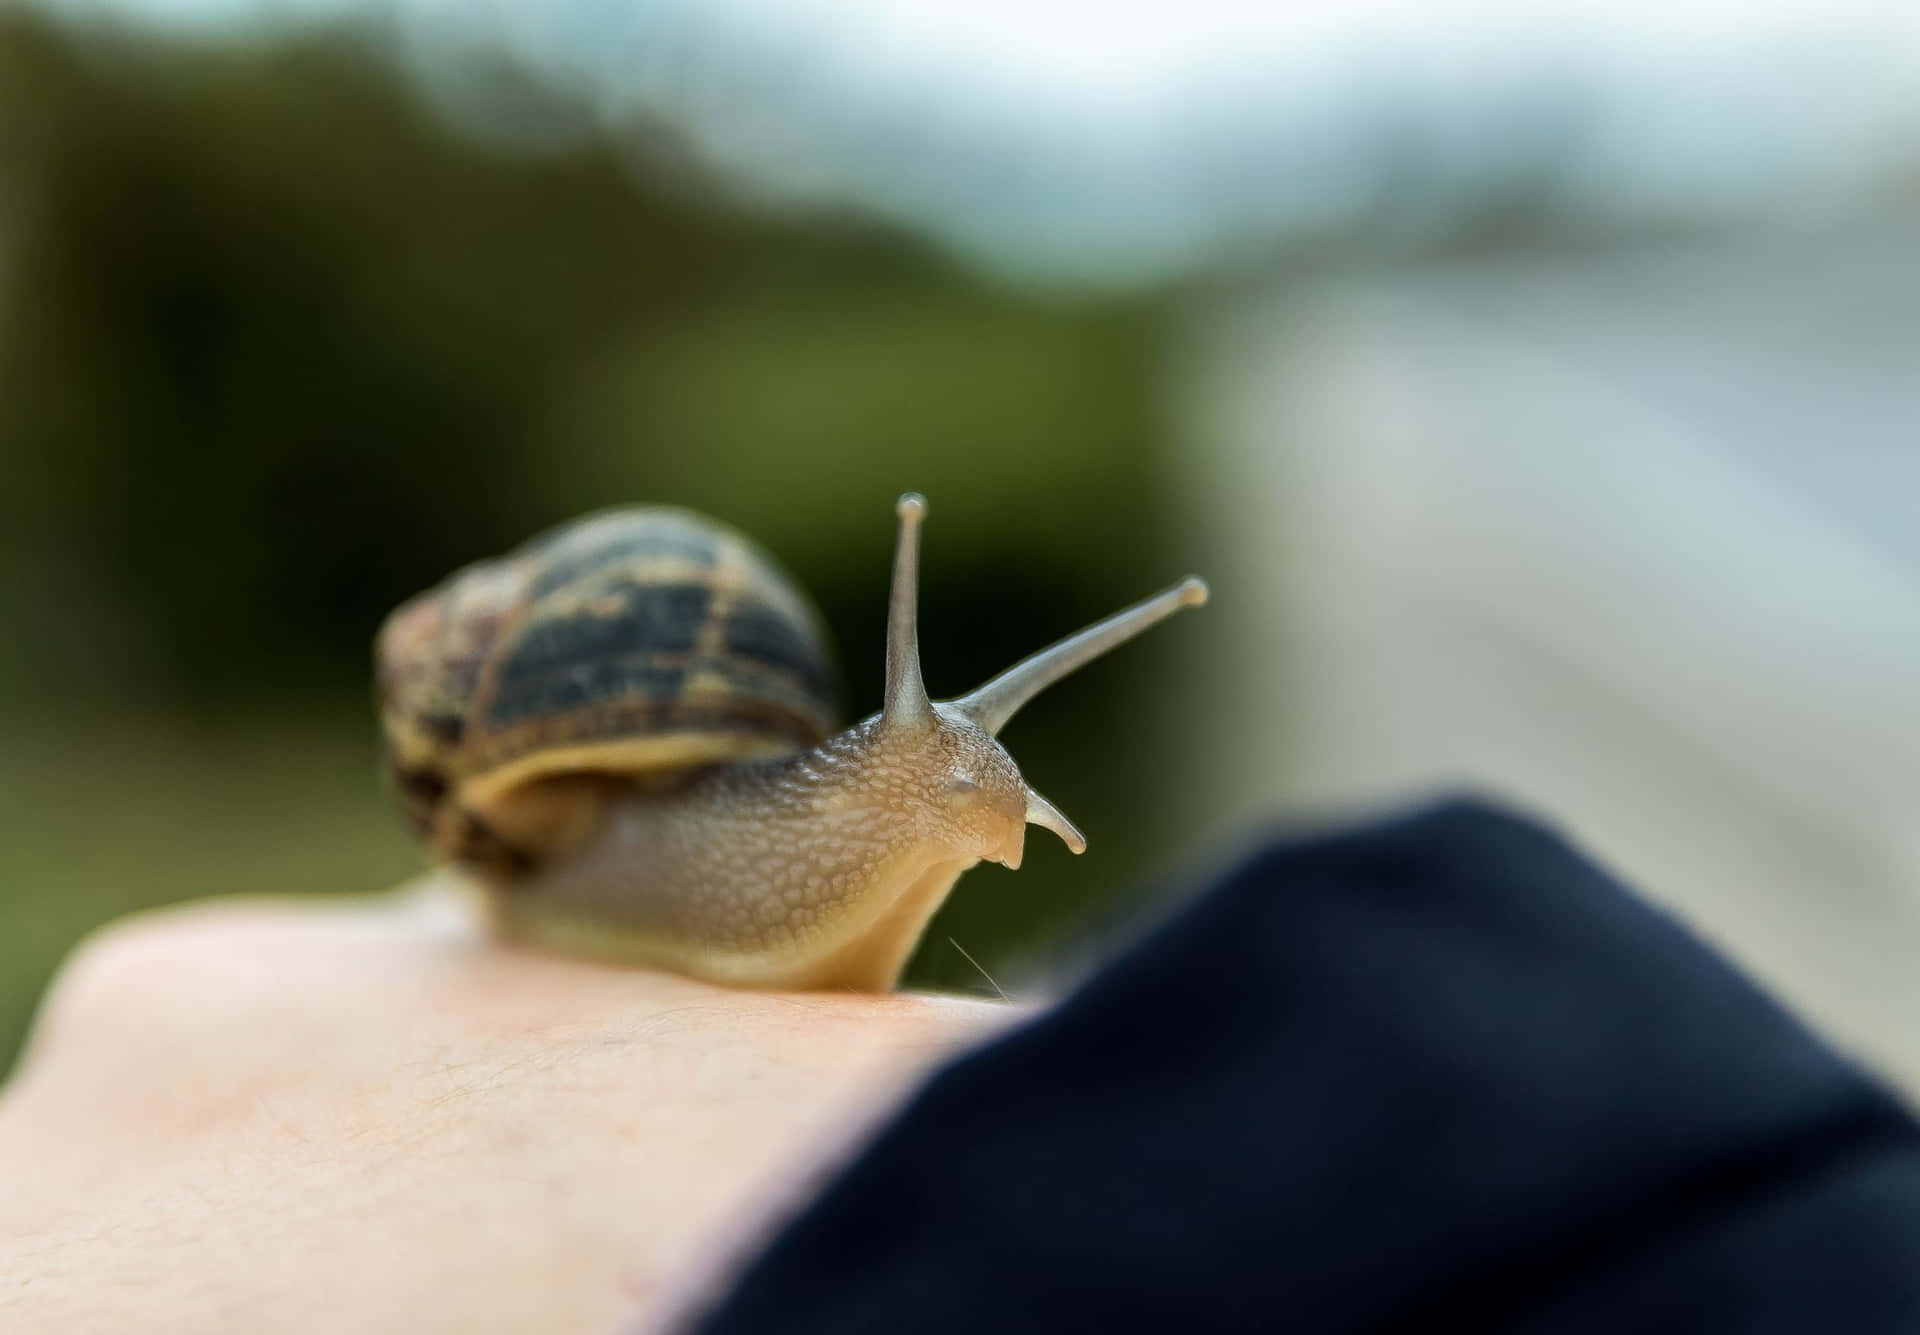 Slow and Steady Movement - A Snail Crawls Across the Rocks